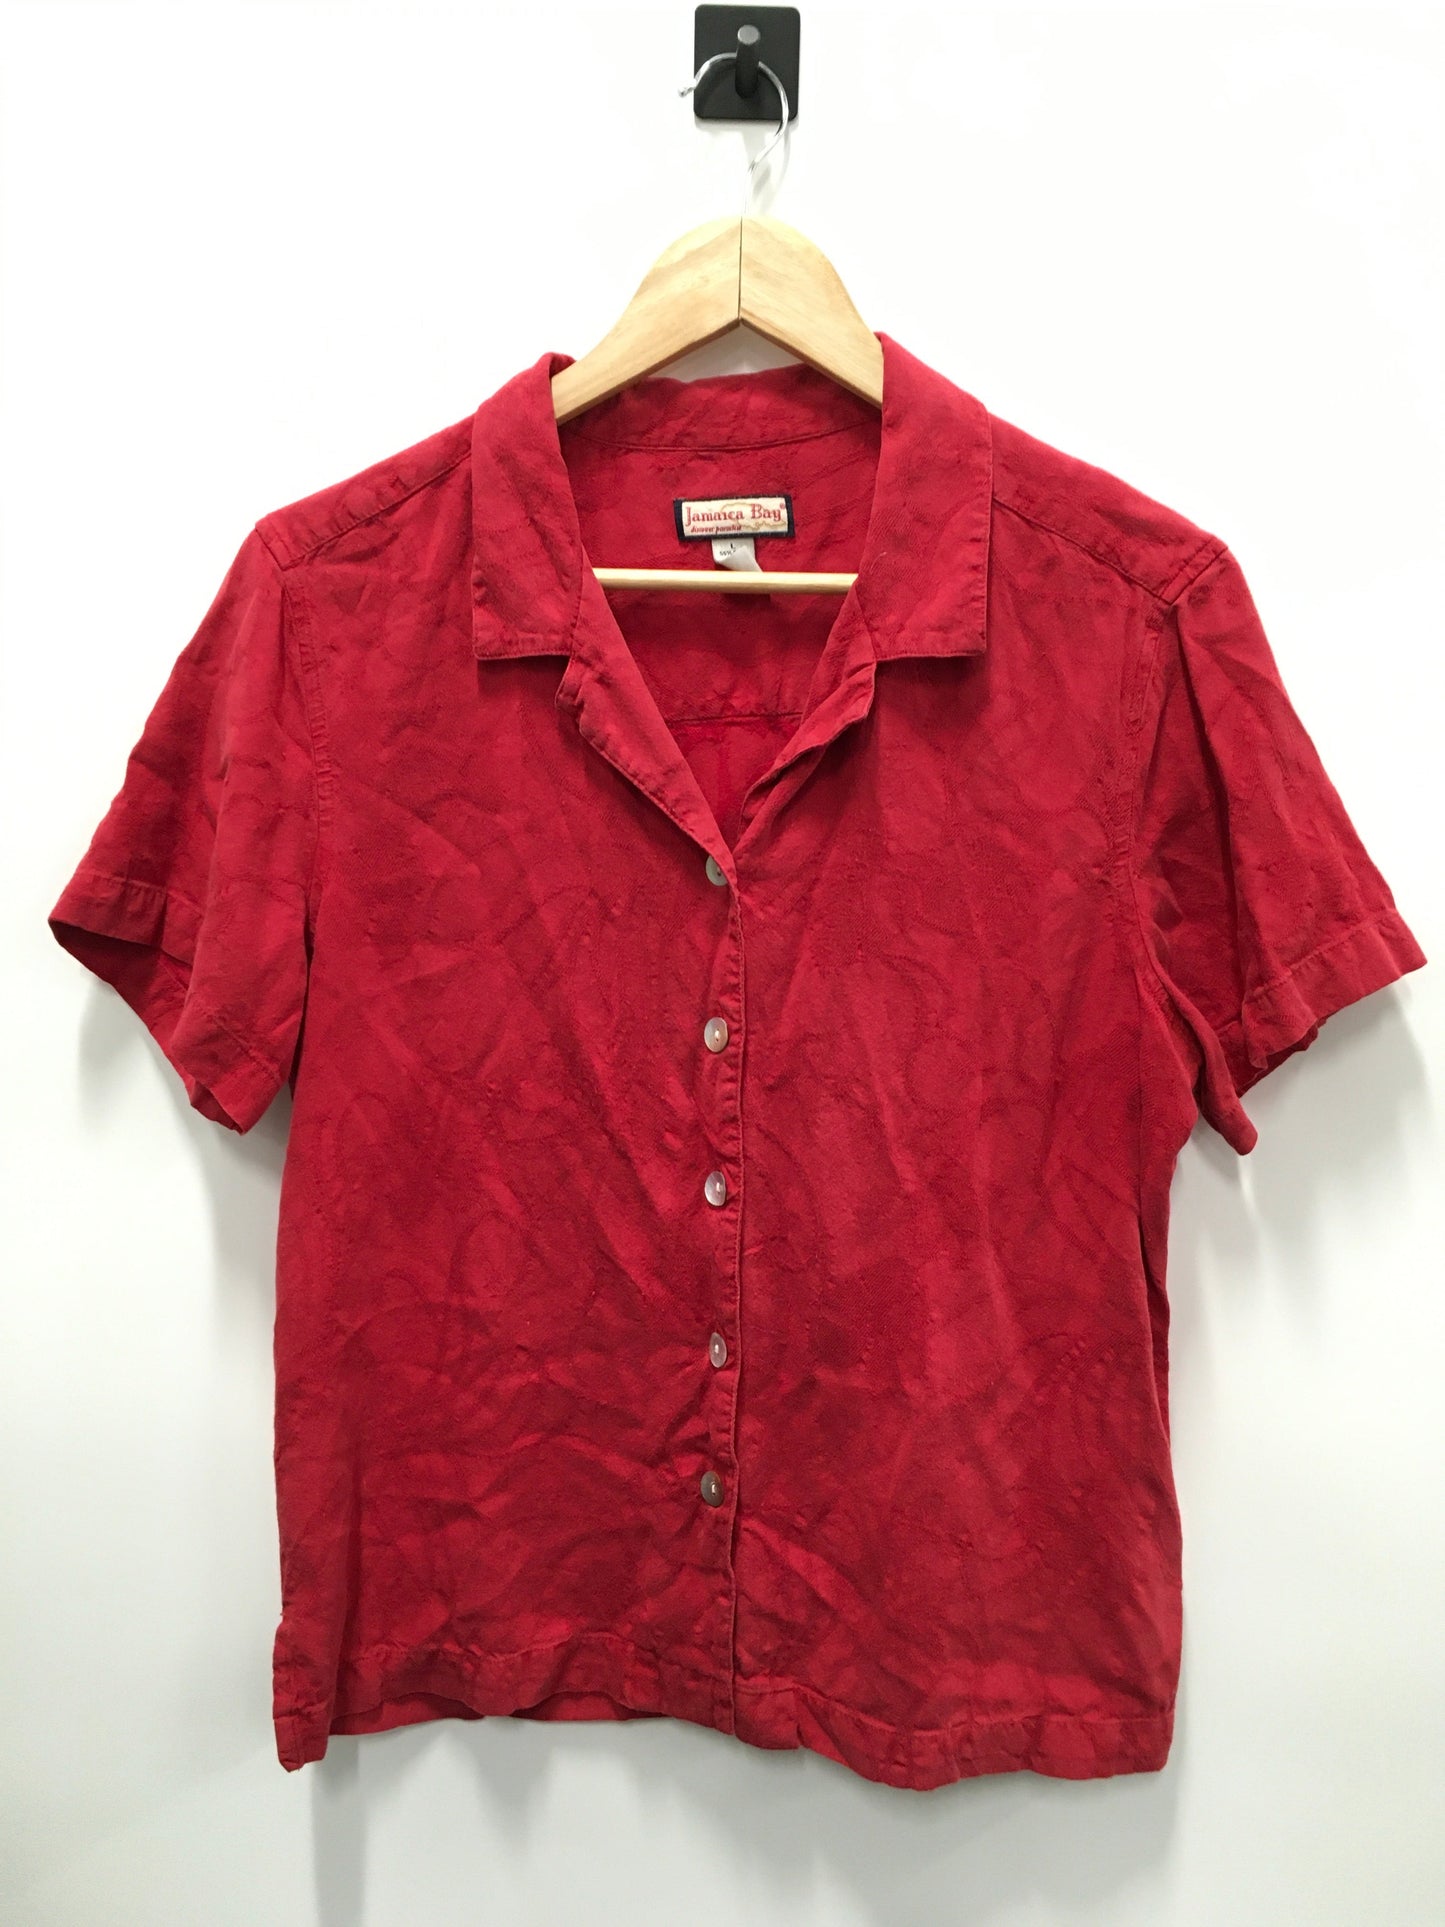 Red Top Short Sleeve Jamaica Bay, Size L